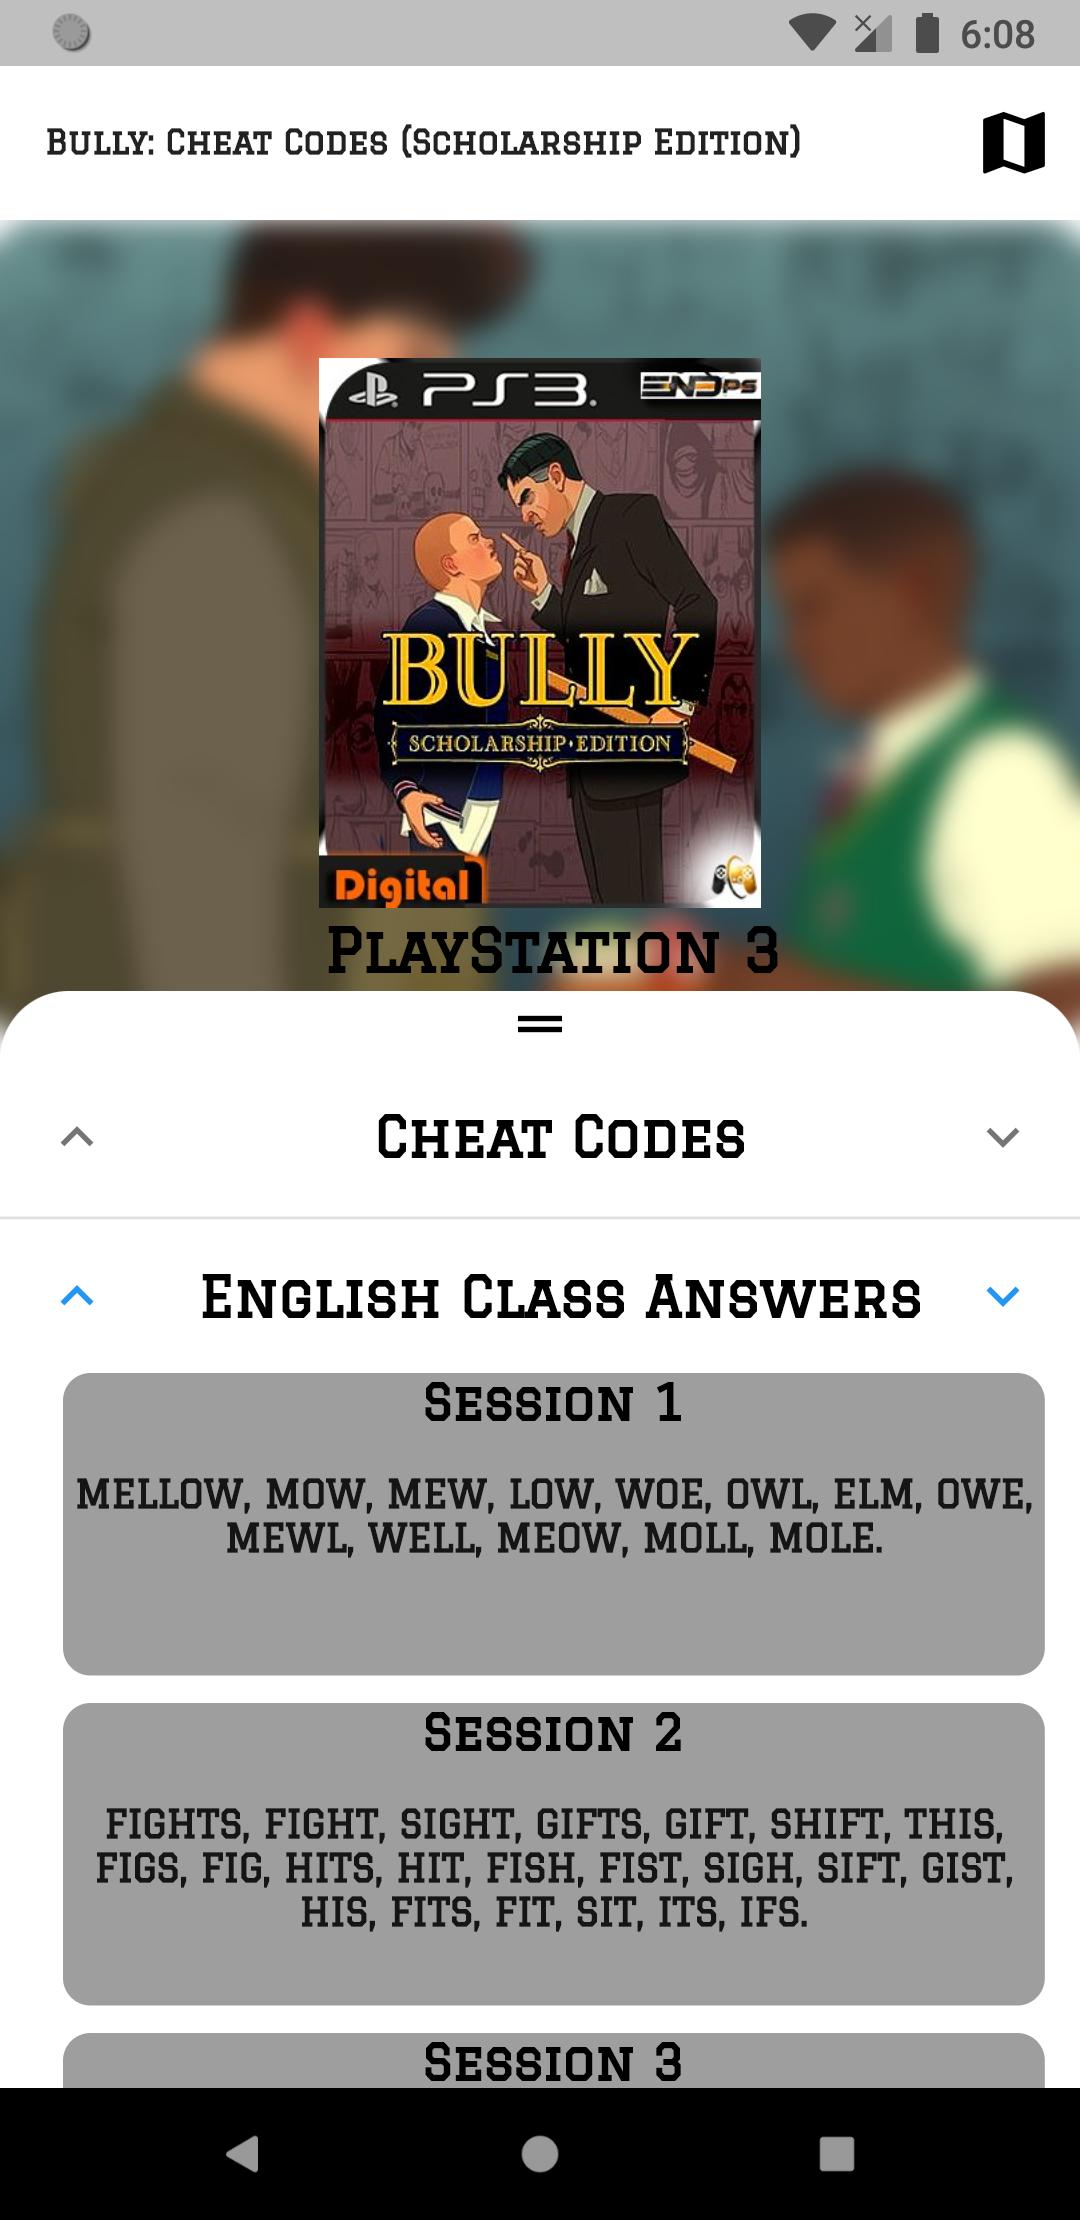 Bully: Cheat Codes - Scholarship Edition APK per Android Download